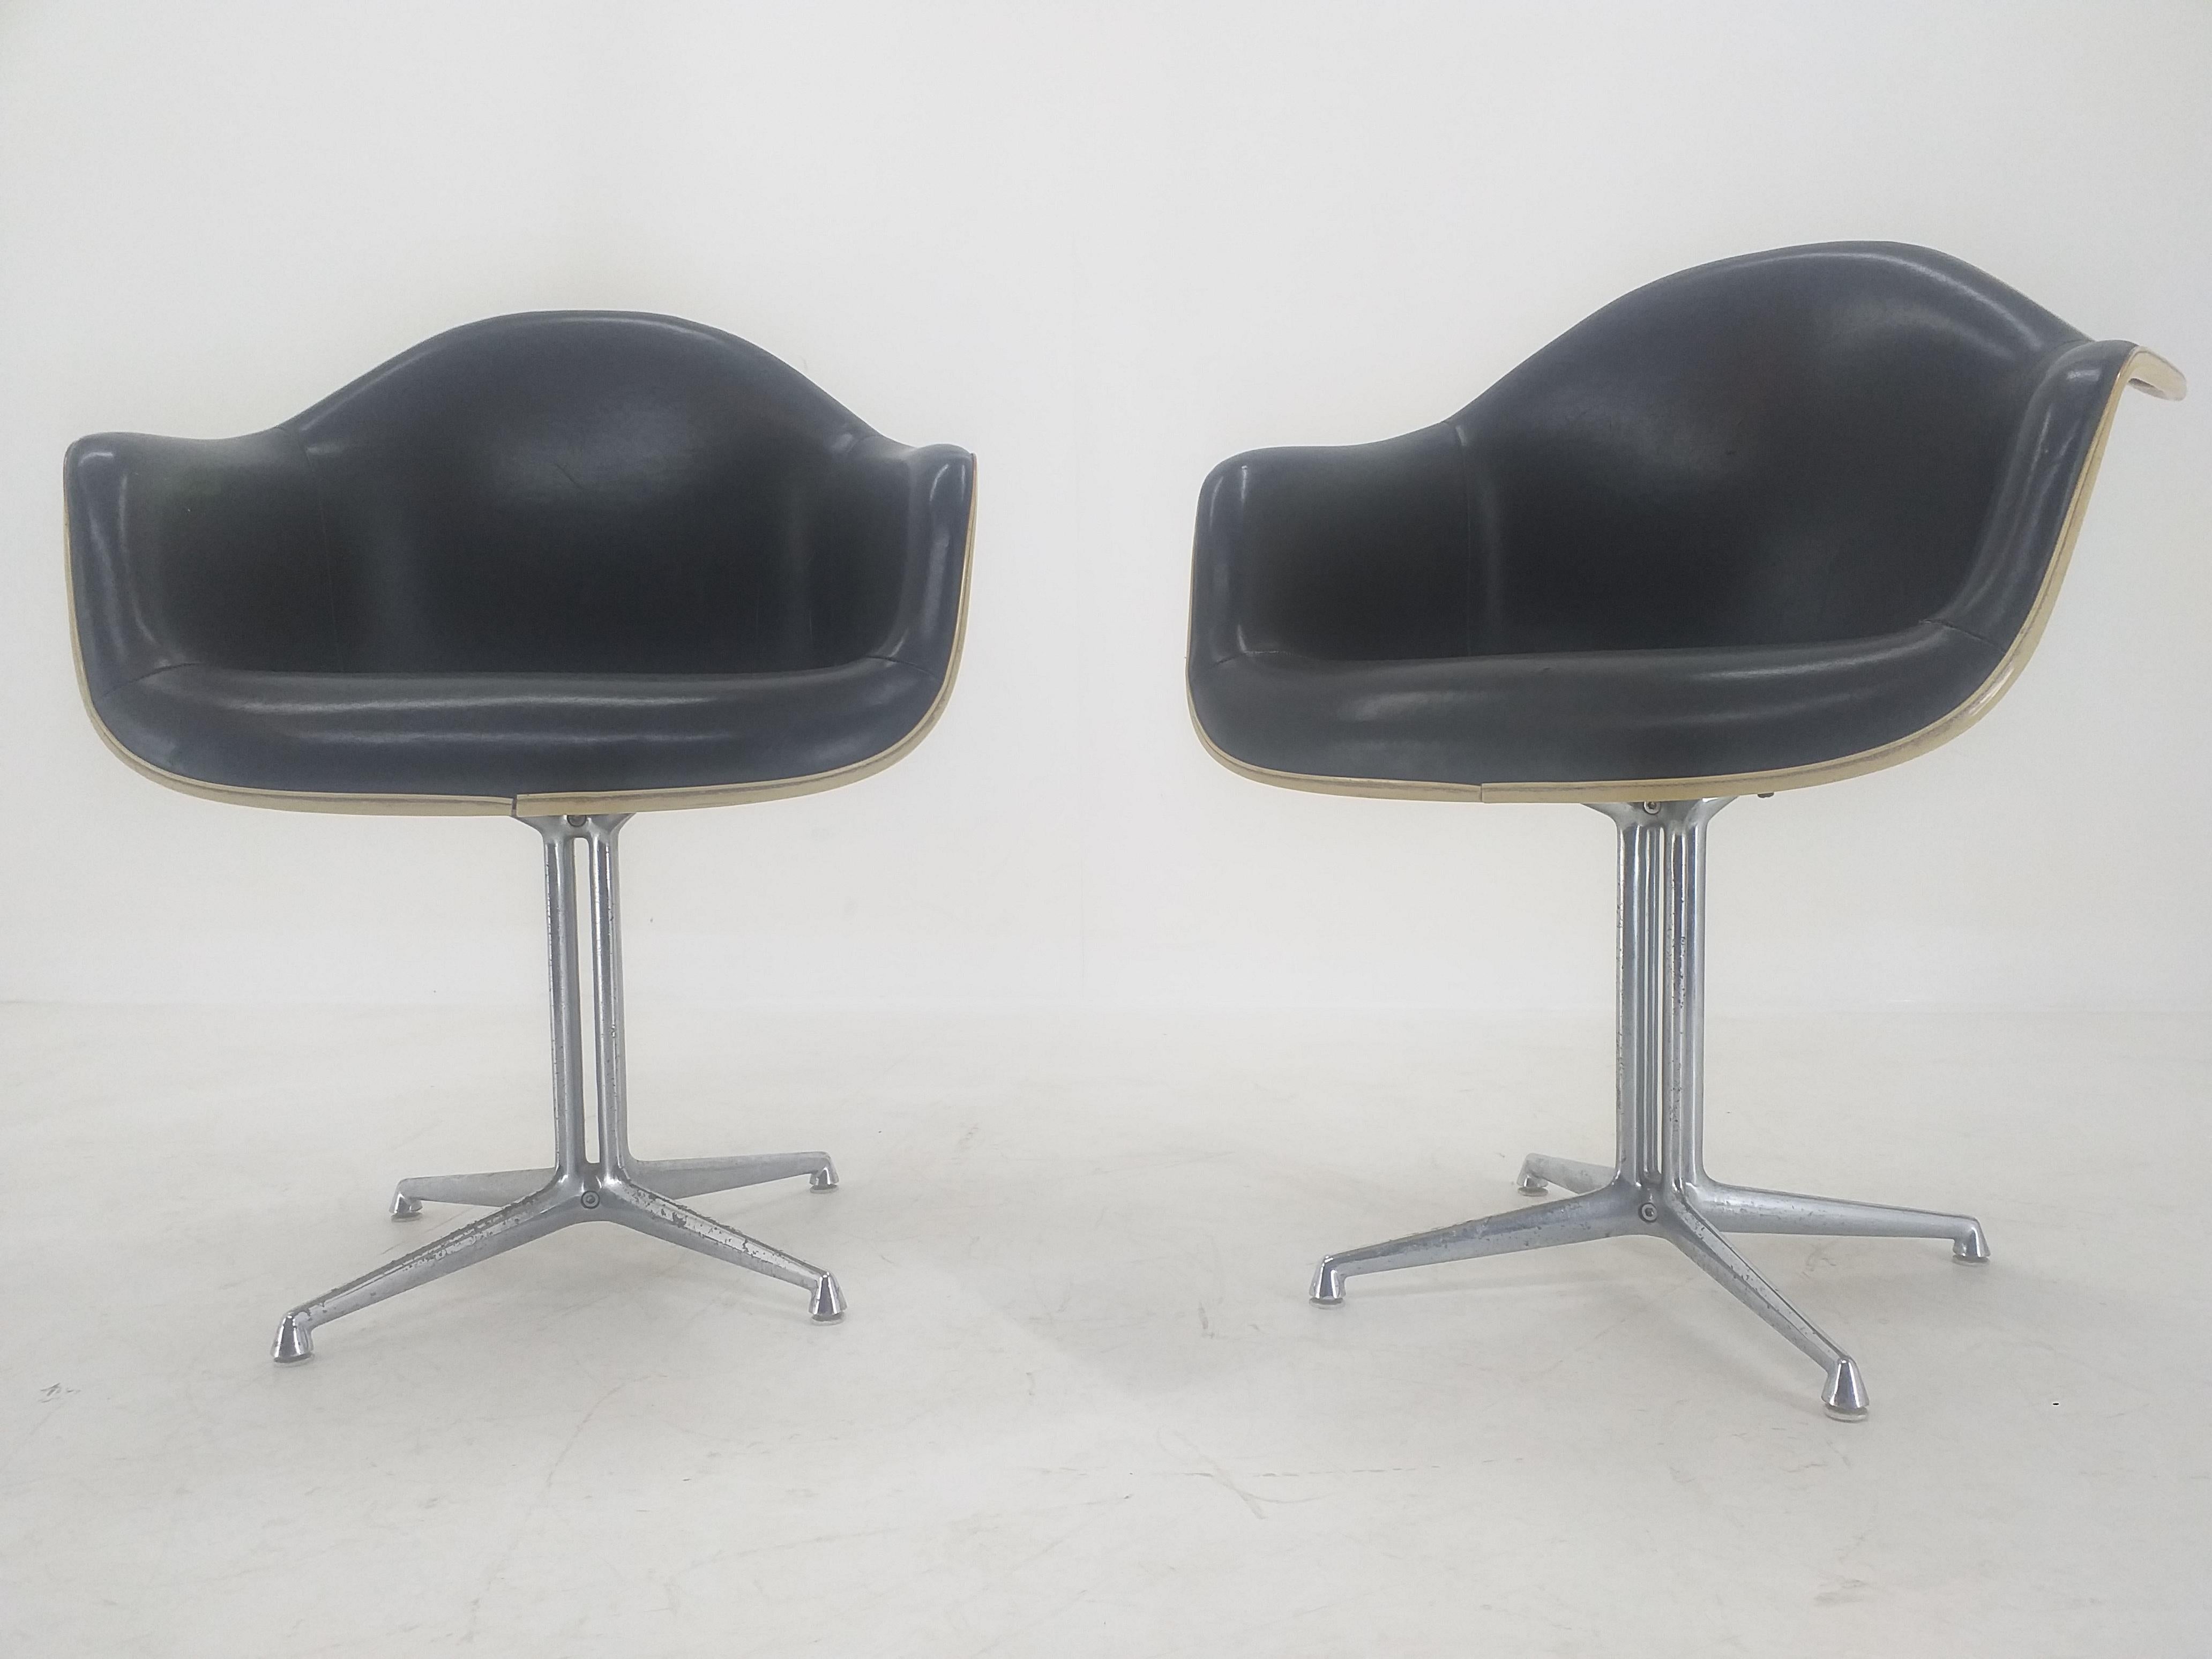 - Very rare type
- Charles & Ray Eames and Alexander Girard
- Marked by original label
- Very comfortable
- DAL, La Fonda.